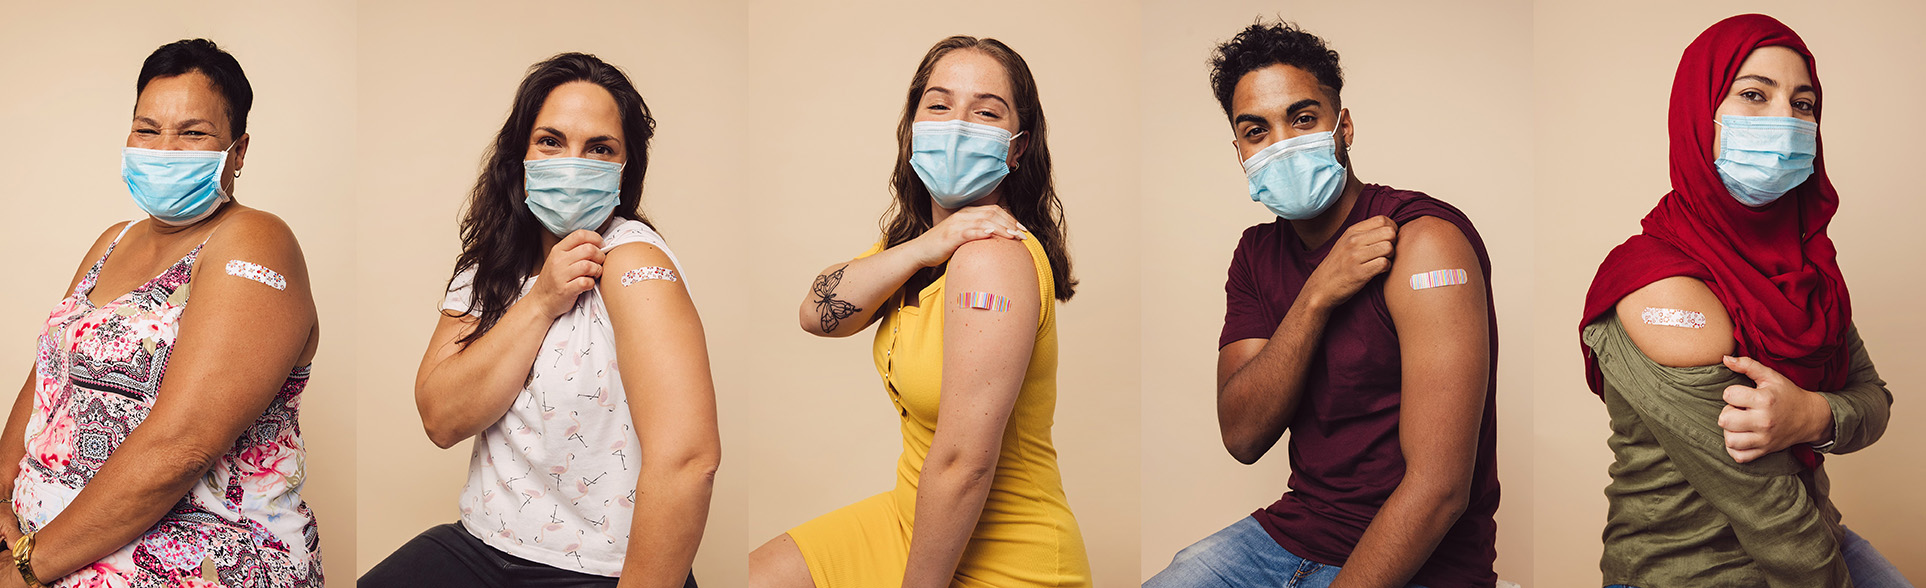 A row of people wearing protective masks and showing an adhesive bandage on their arm after vaccination